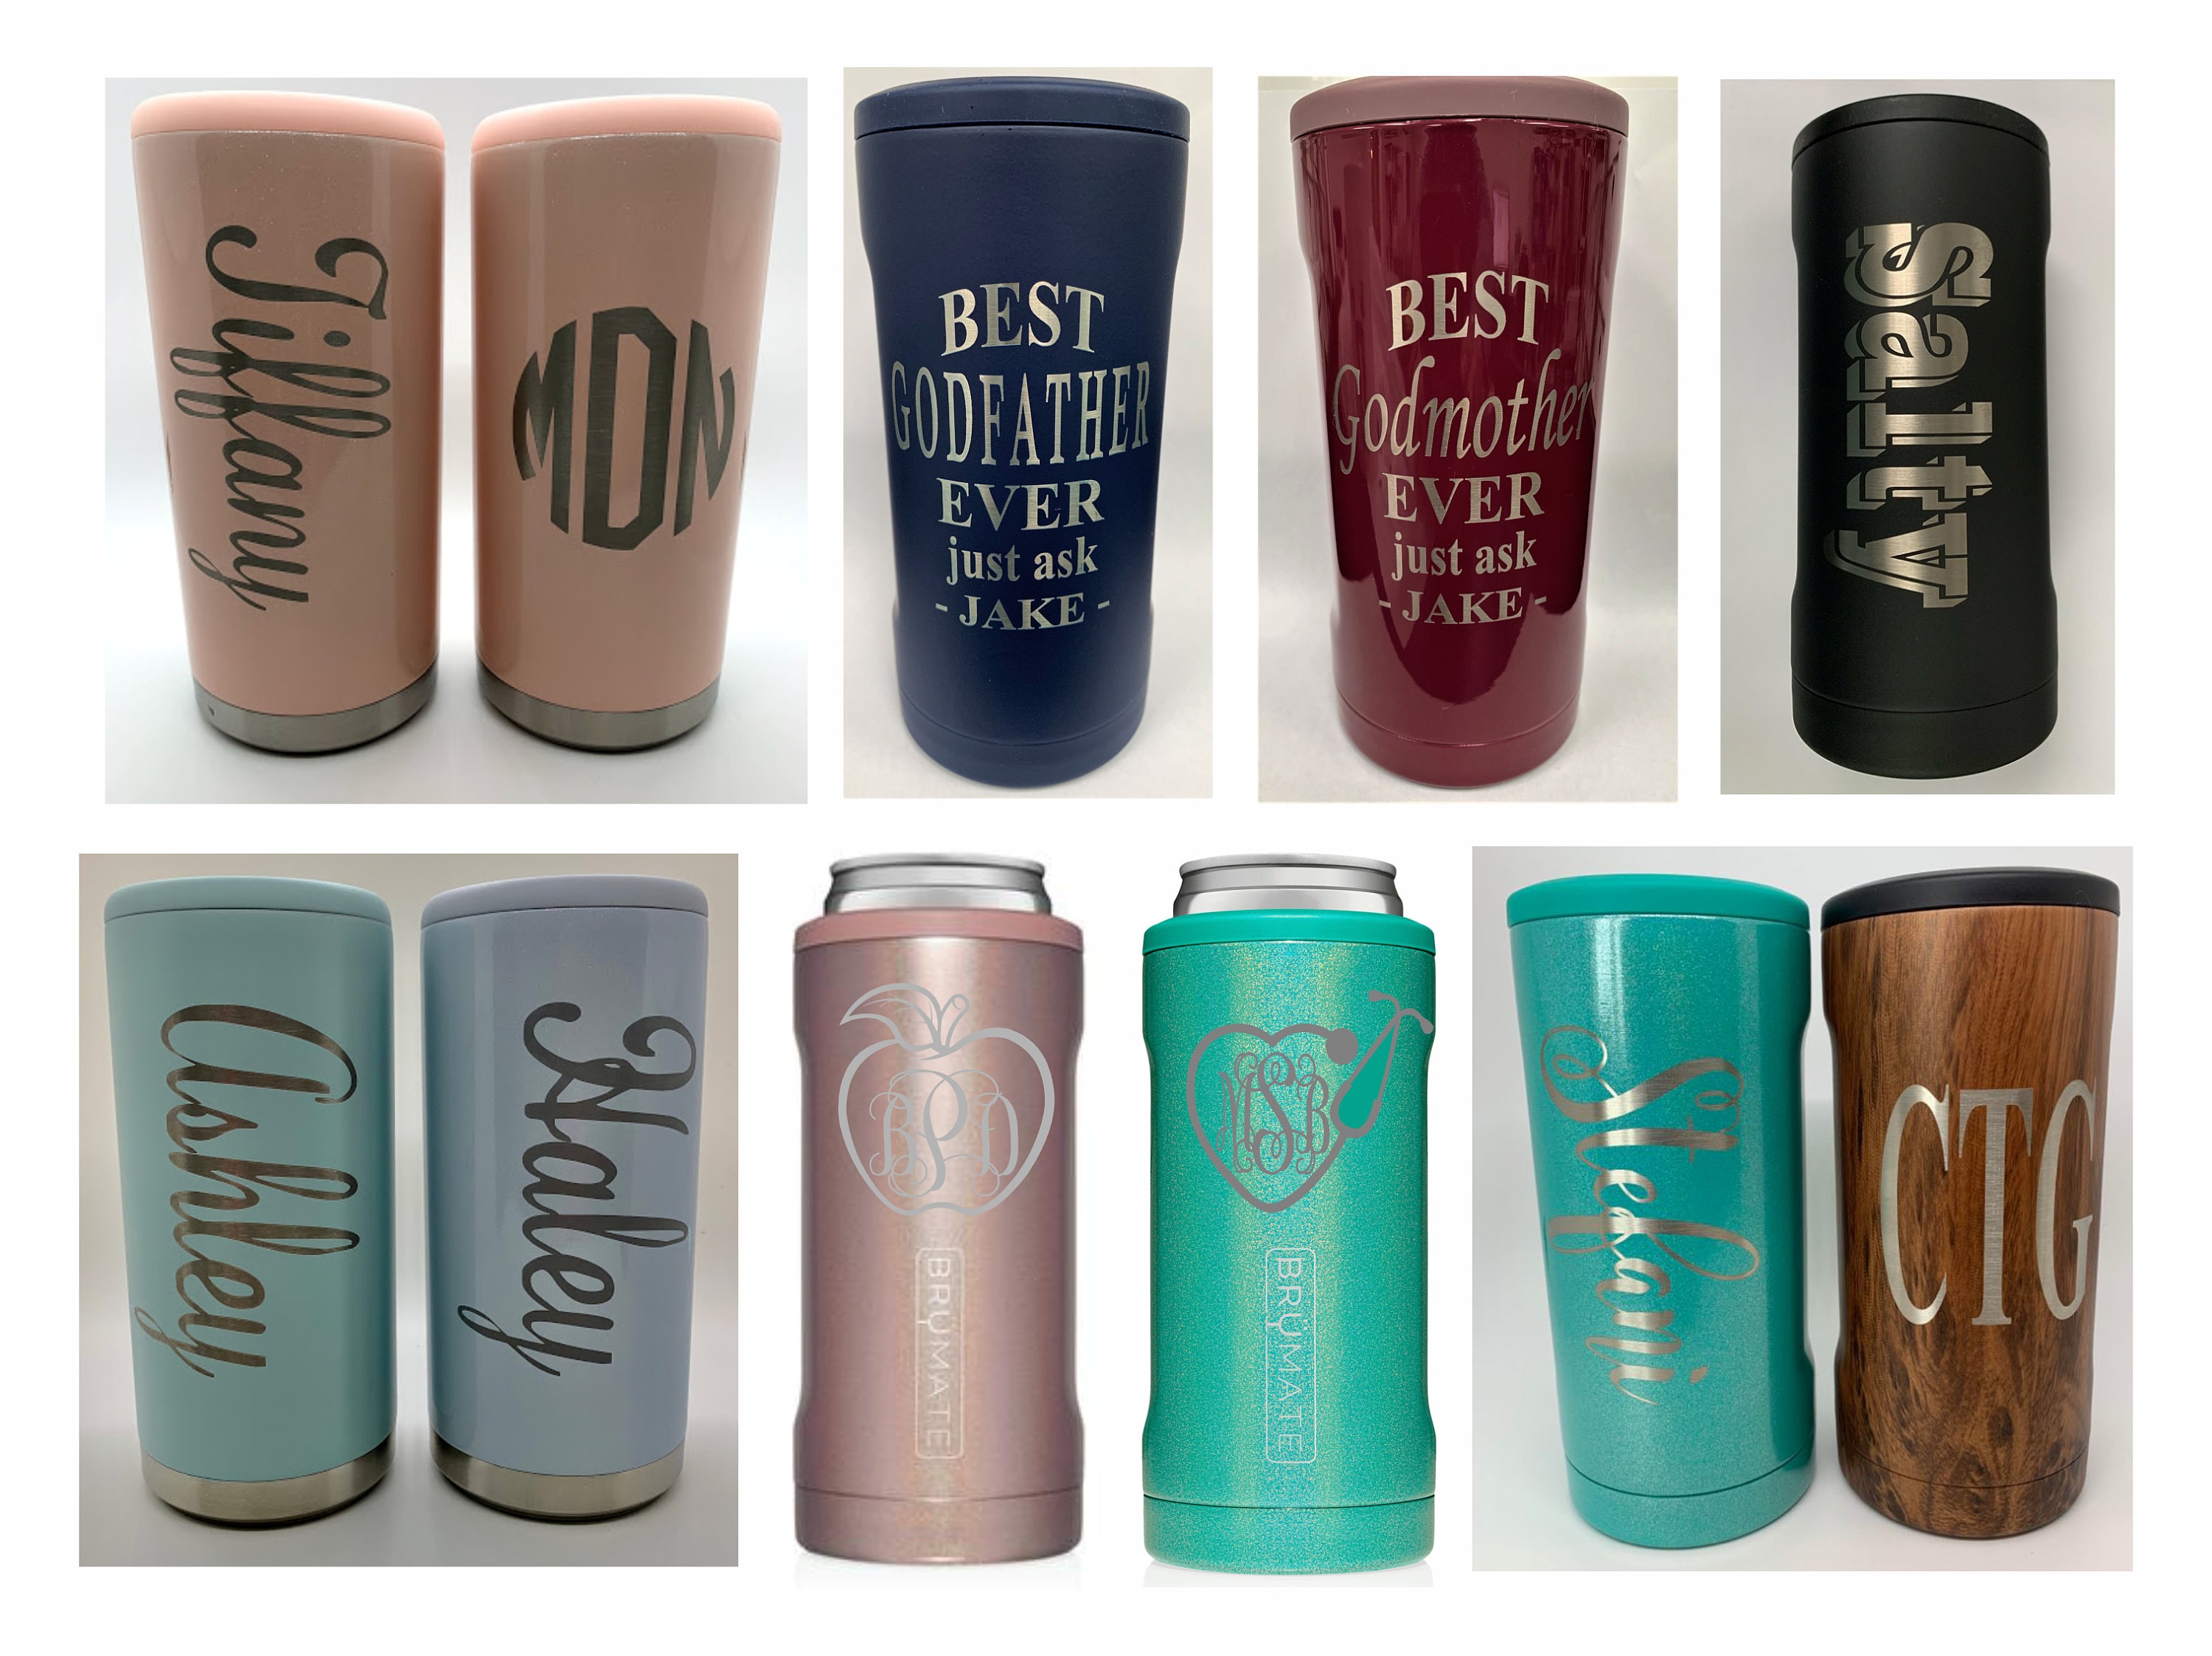 Personalized BruMate Hopsulator Duo 2-in-1 MUV - Powder Coated - Customized  Your Way with a Logo, Monogram, or Design - Iconic Imprint